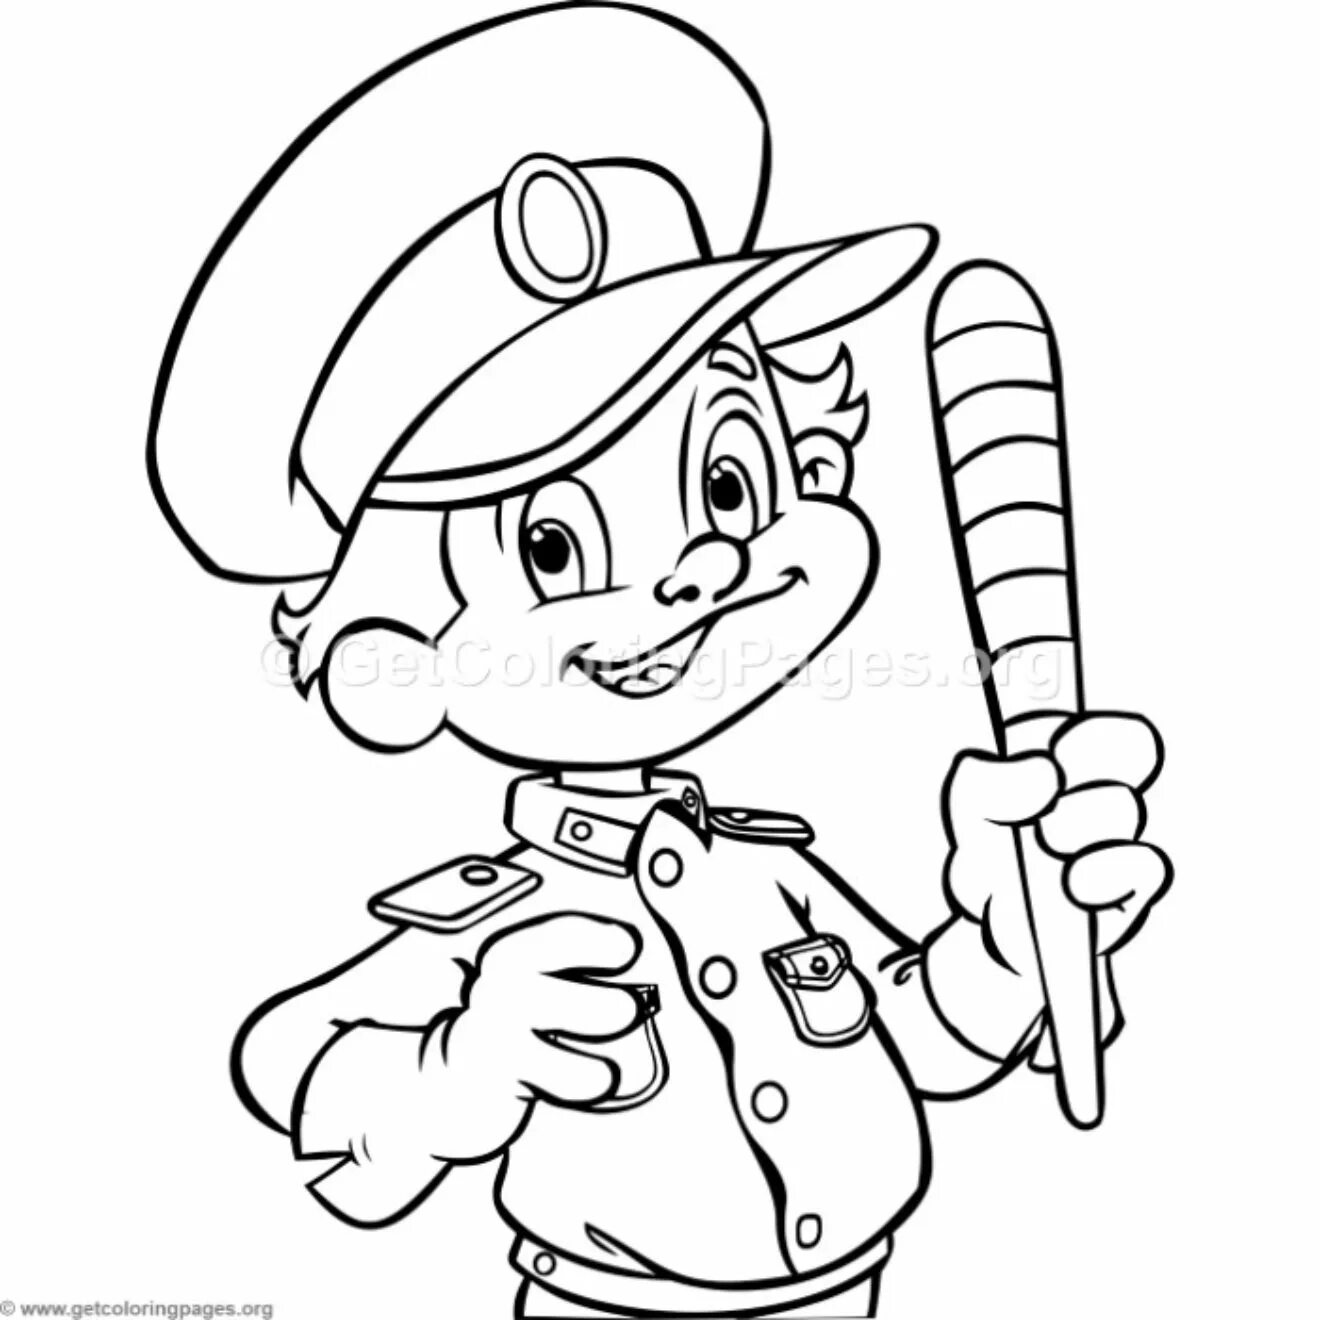 Attractive traffic controller coloring page for little ones